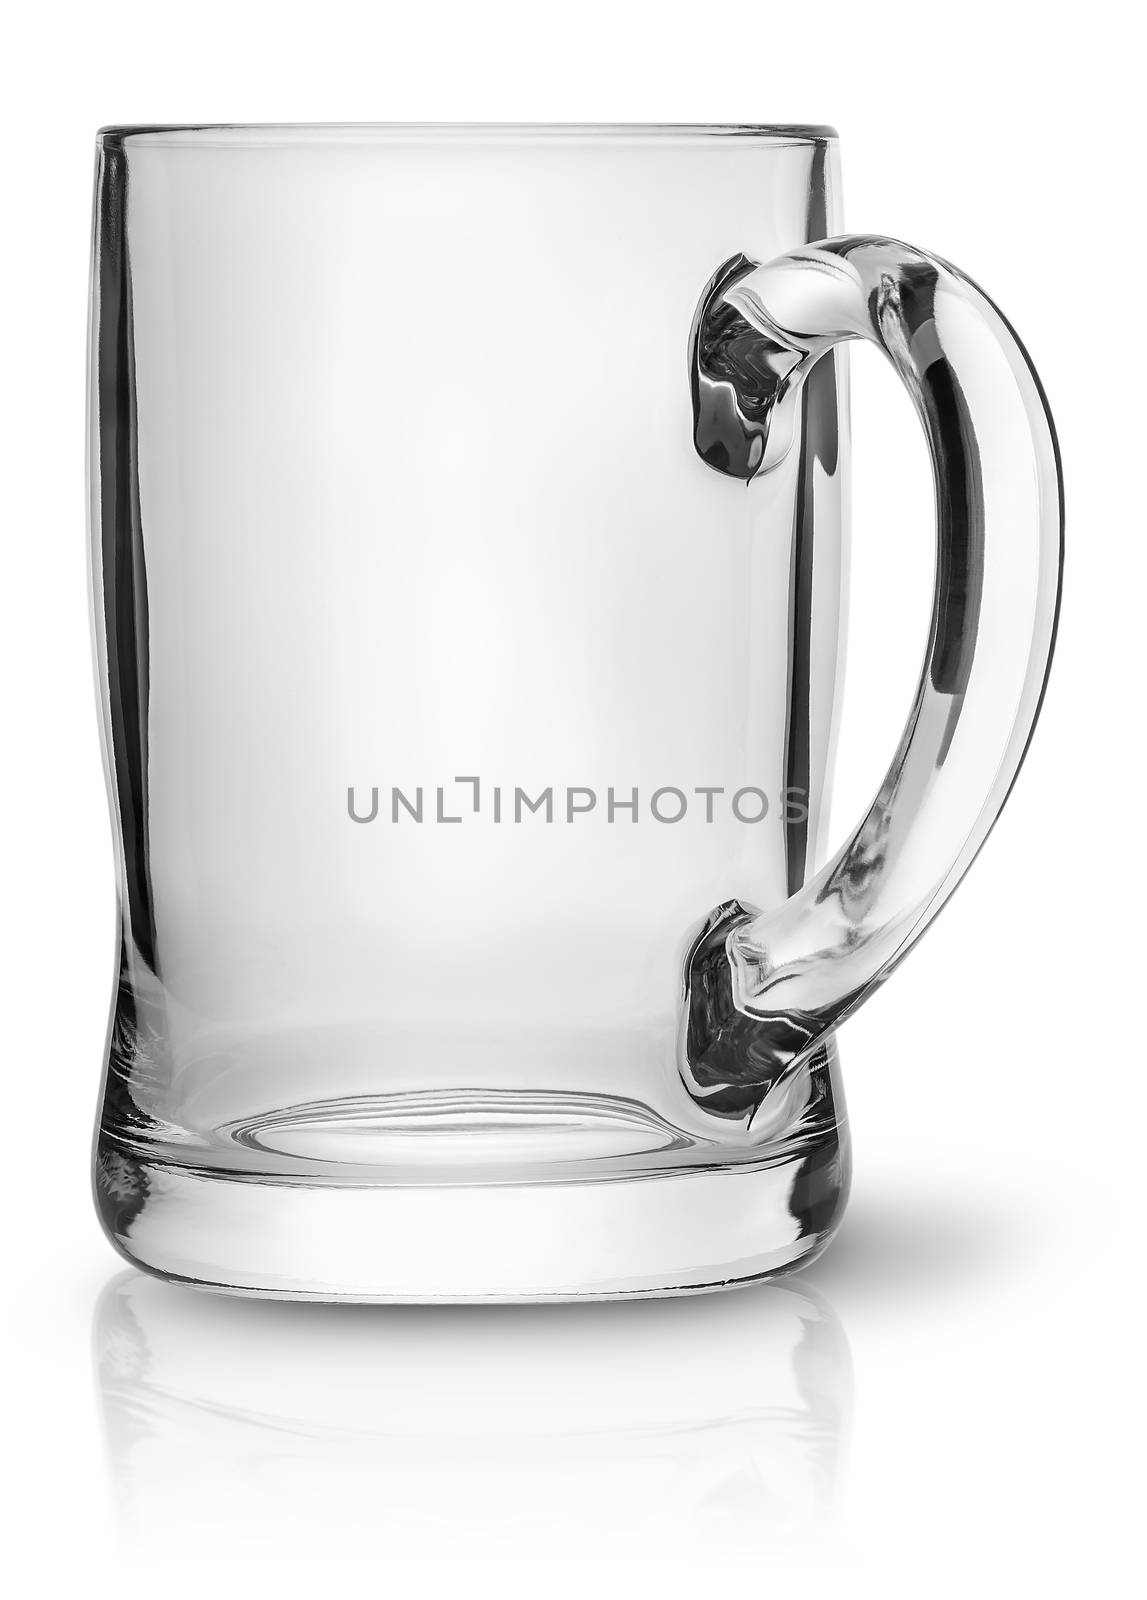 Mug for beer rotated isolated on white background